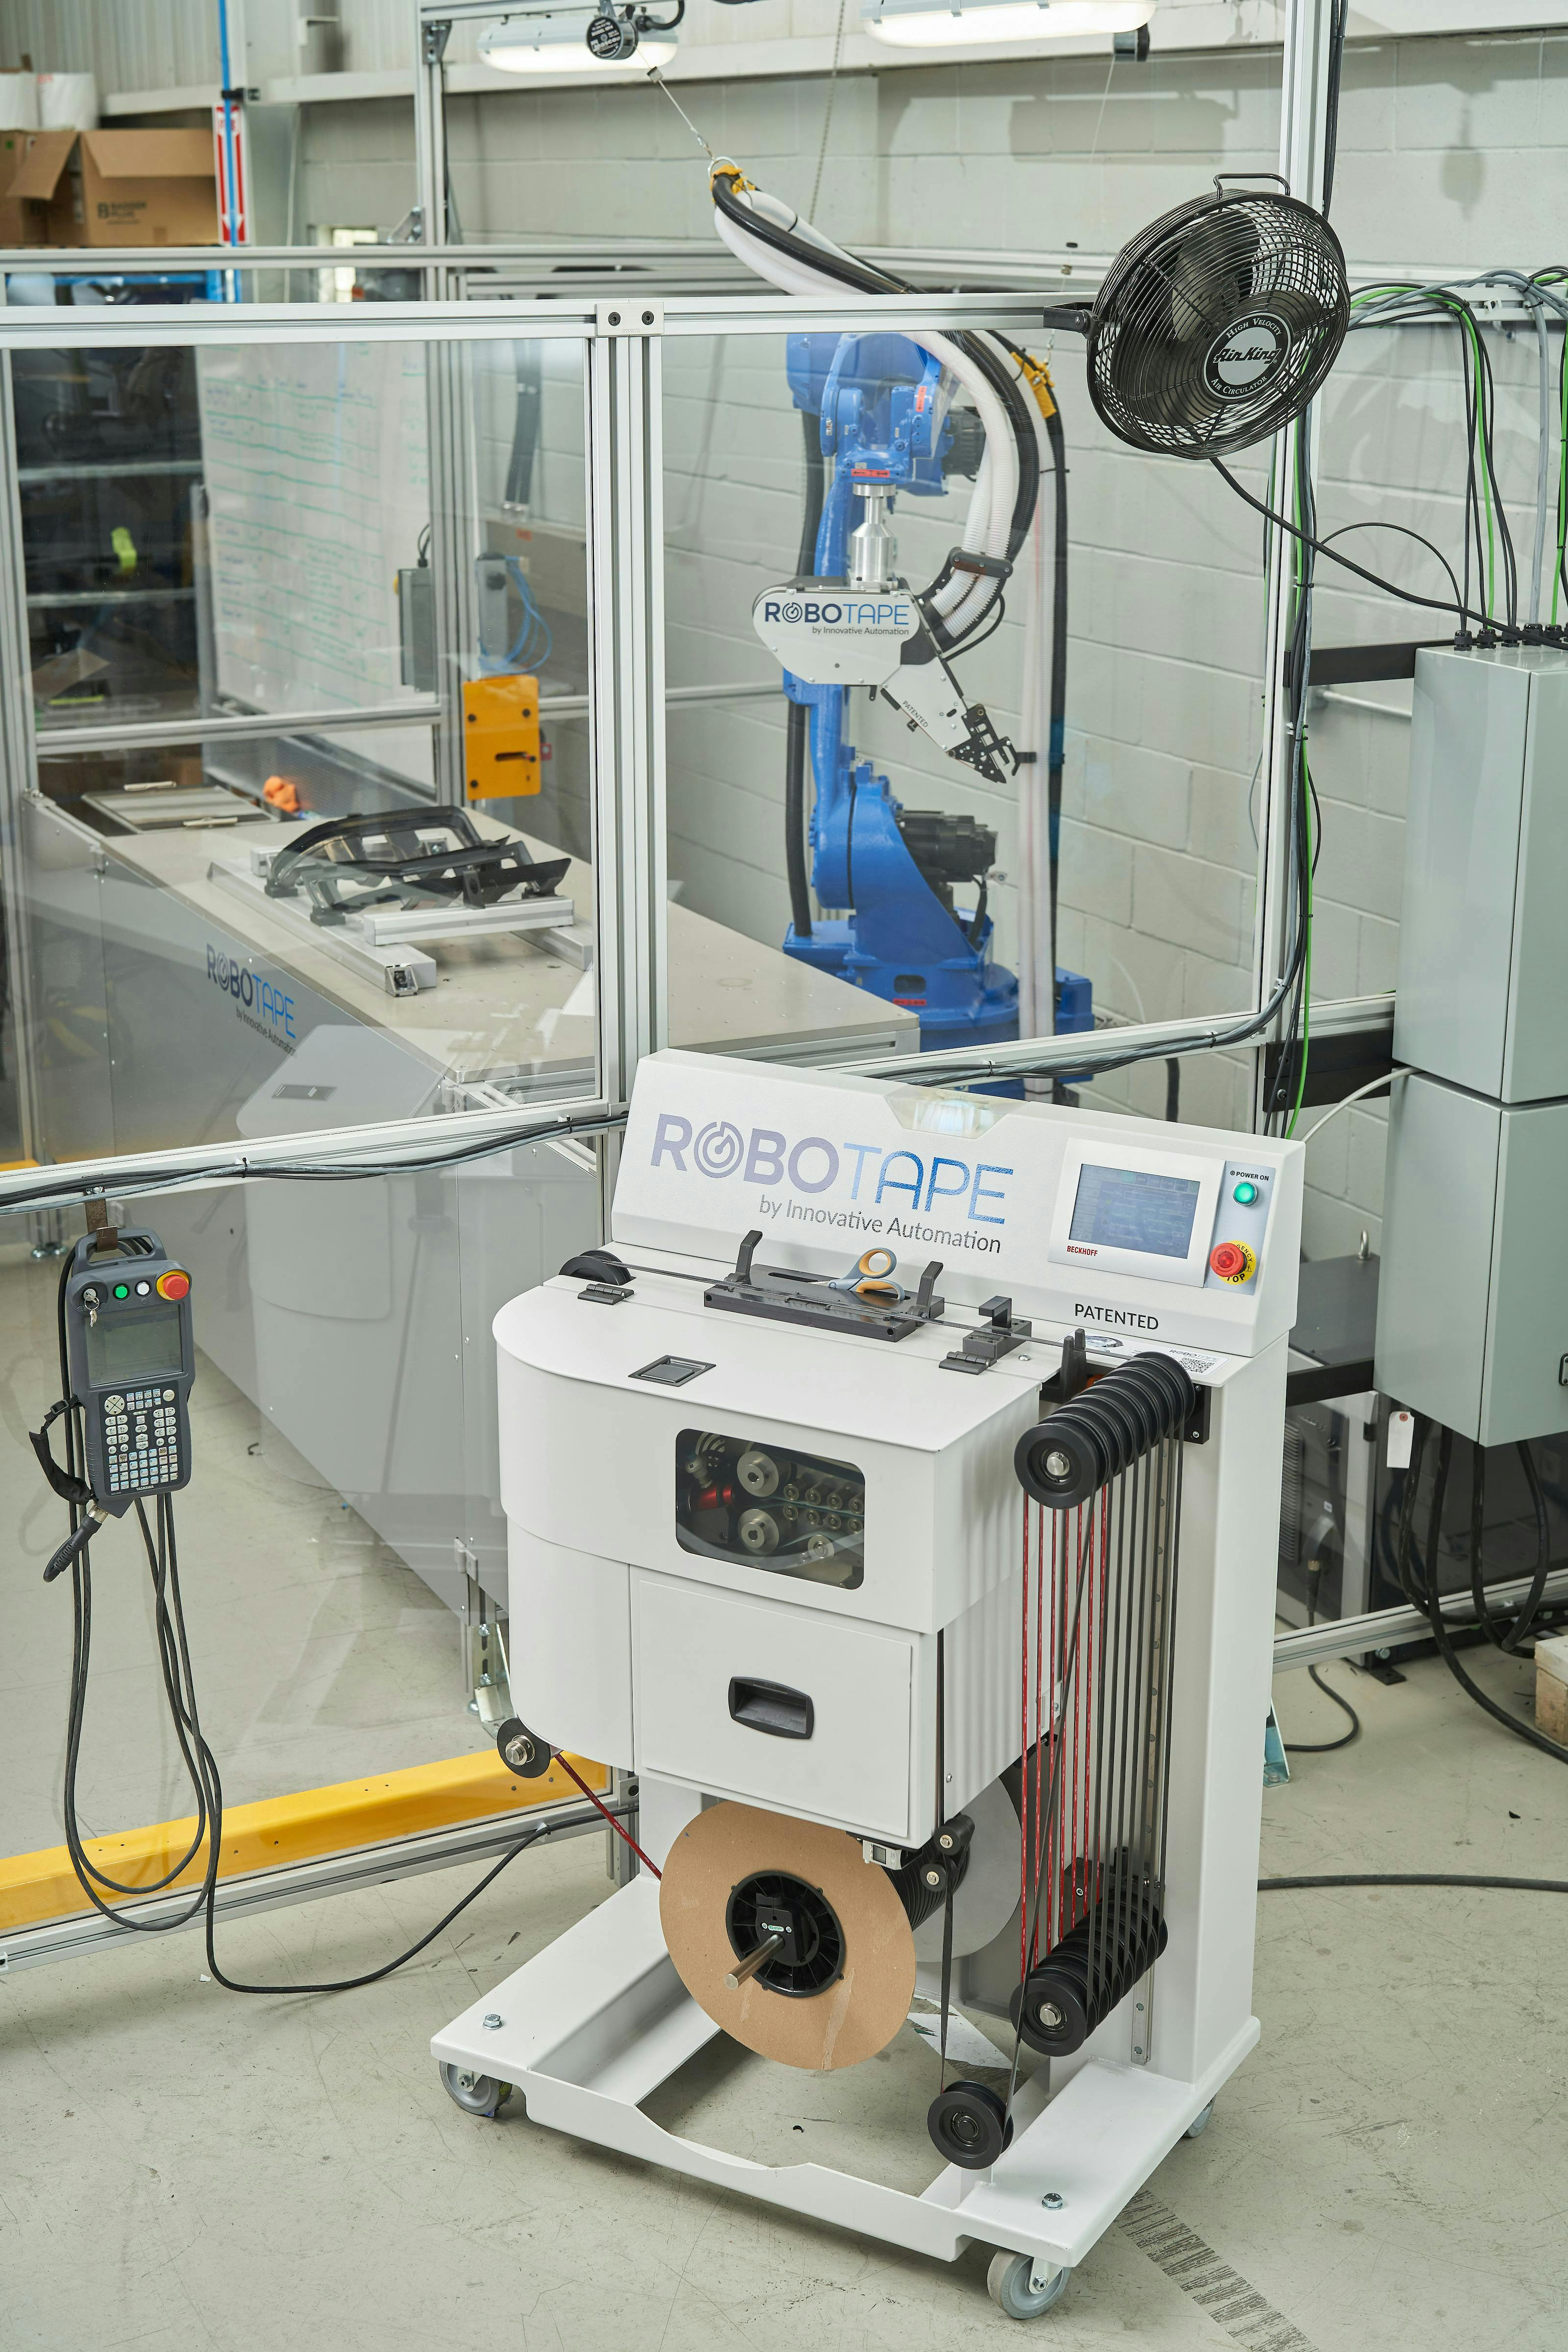 Figure 8: The RoboTape&rsquo;s remote feeding system allows operators to change spools without entering the robot cell, eliminating potential hazards.